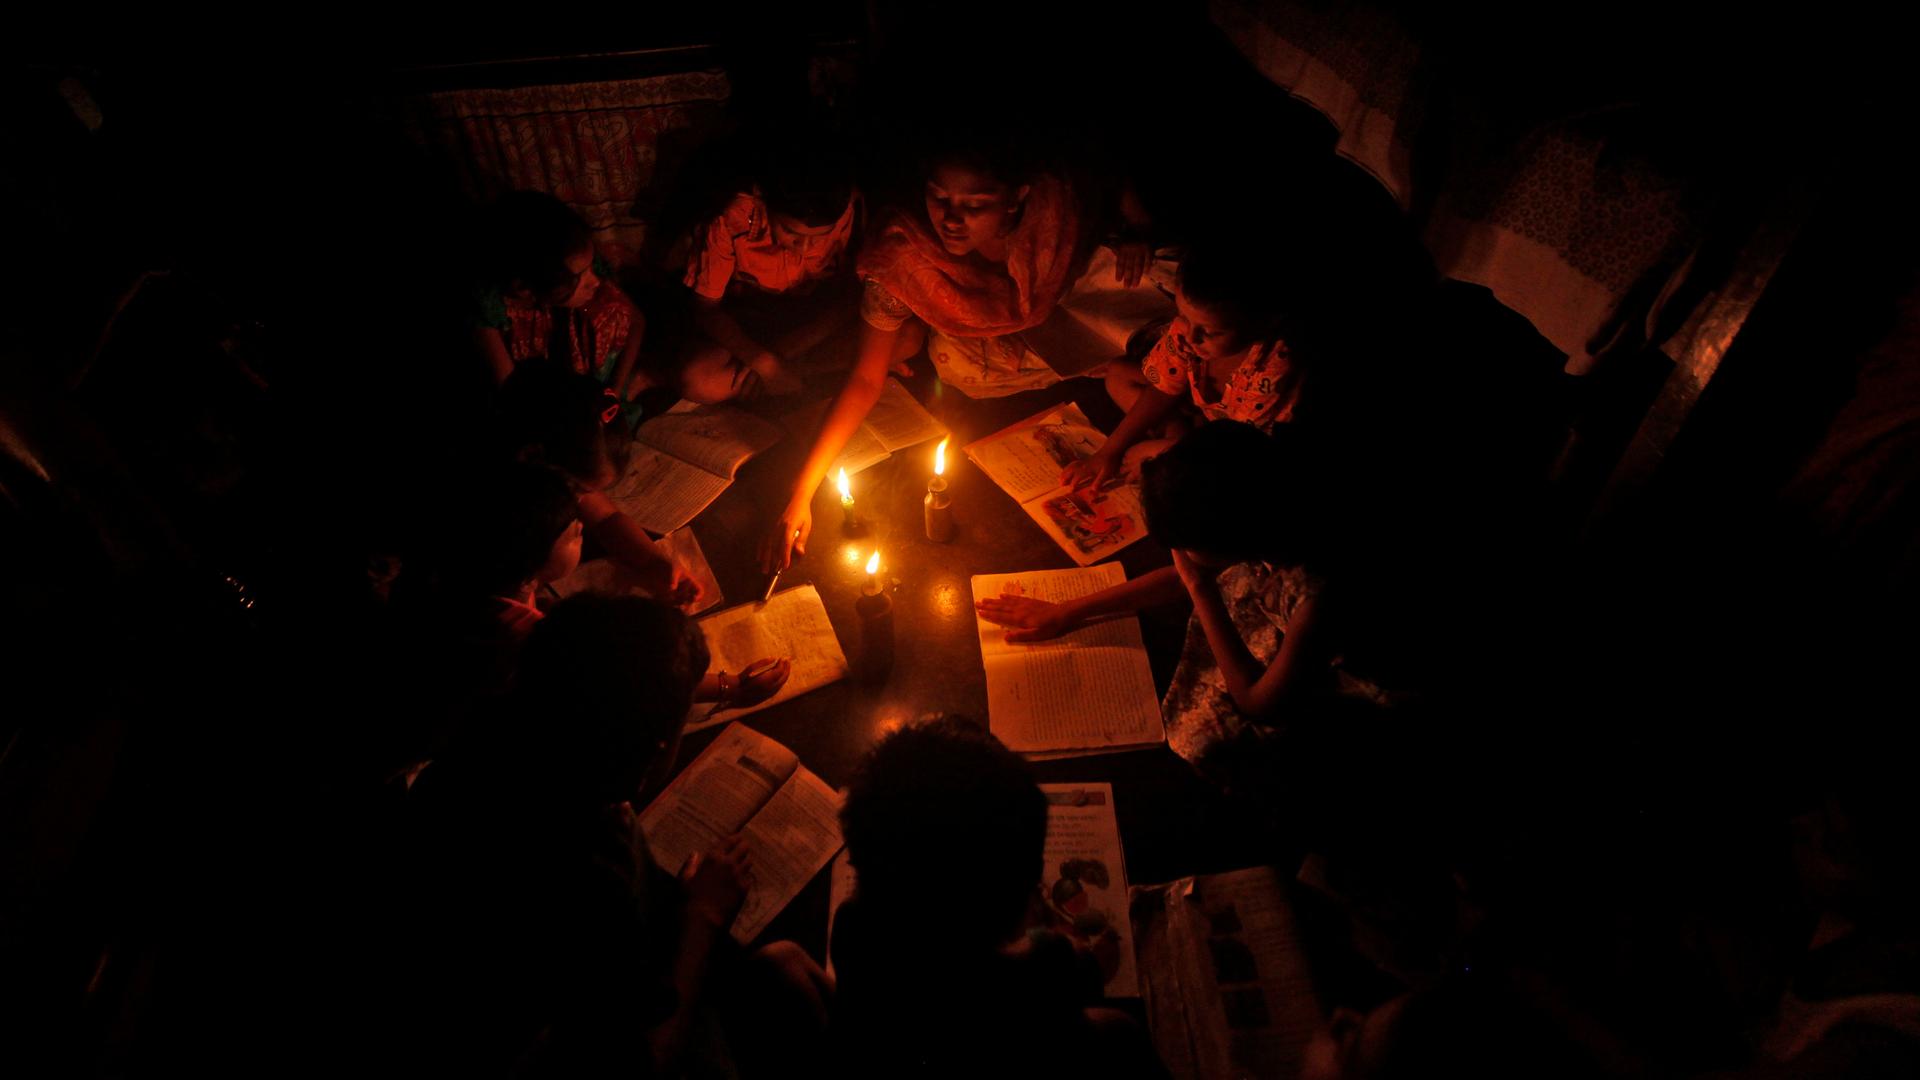 A teacher in Kolkata conducts a lesson during a particularly bad power outage that swept across India in July, 2012.